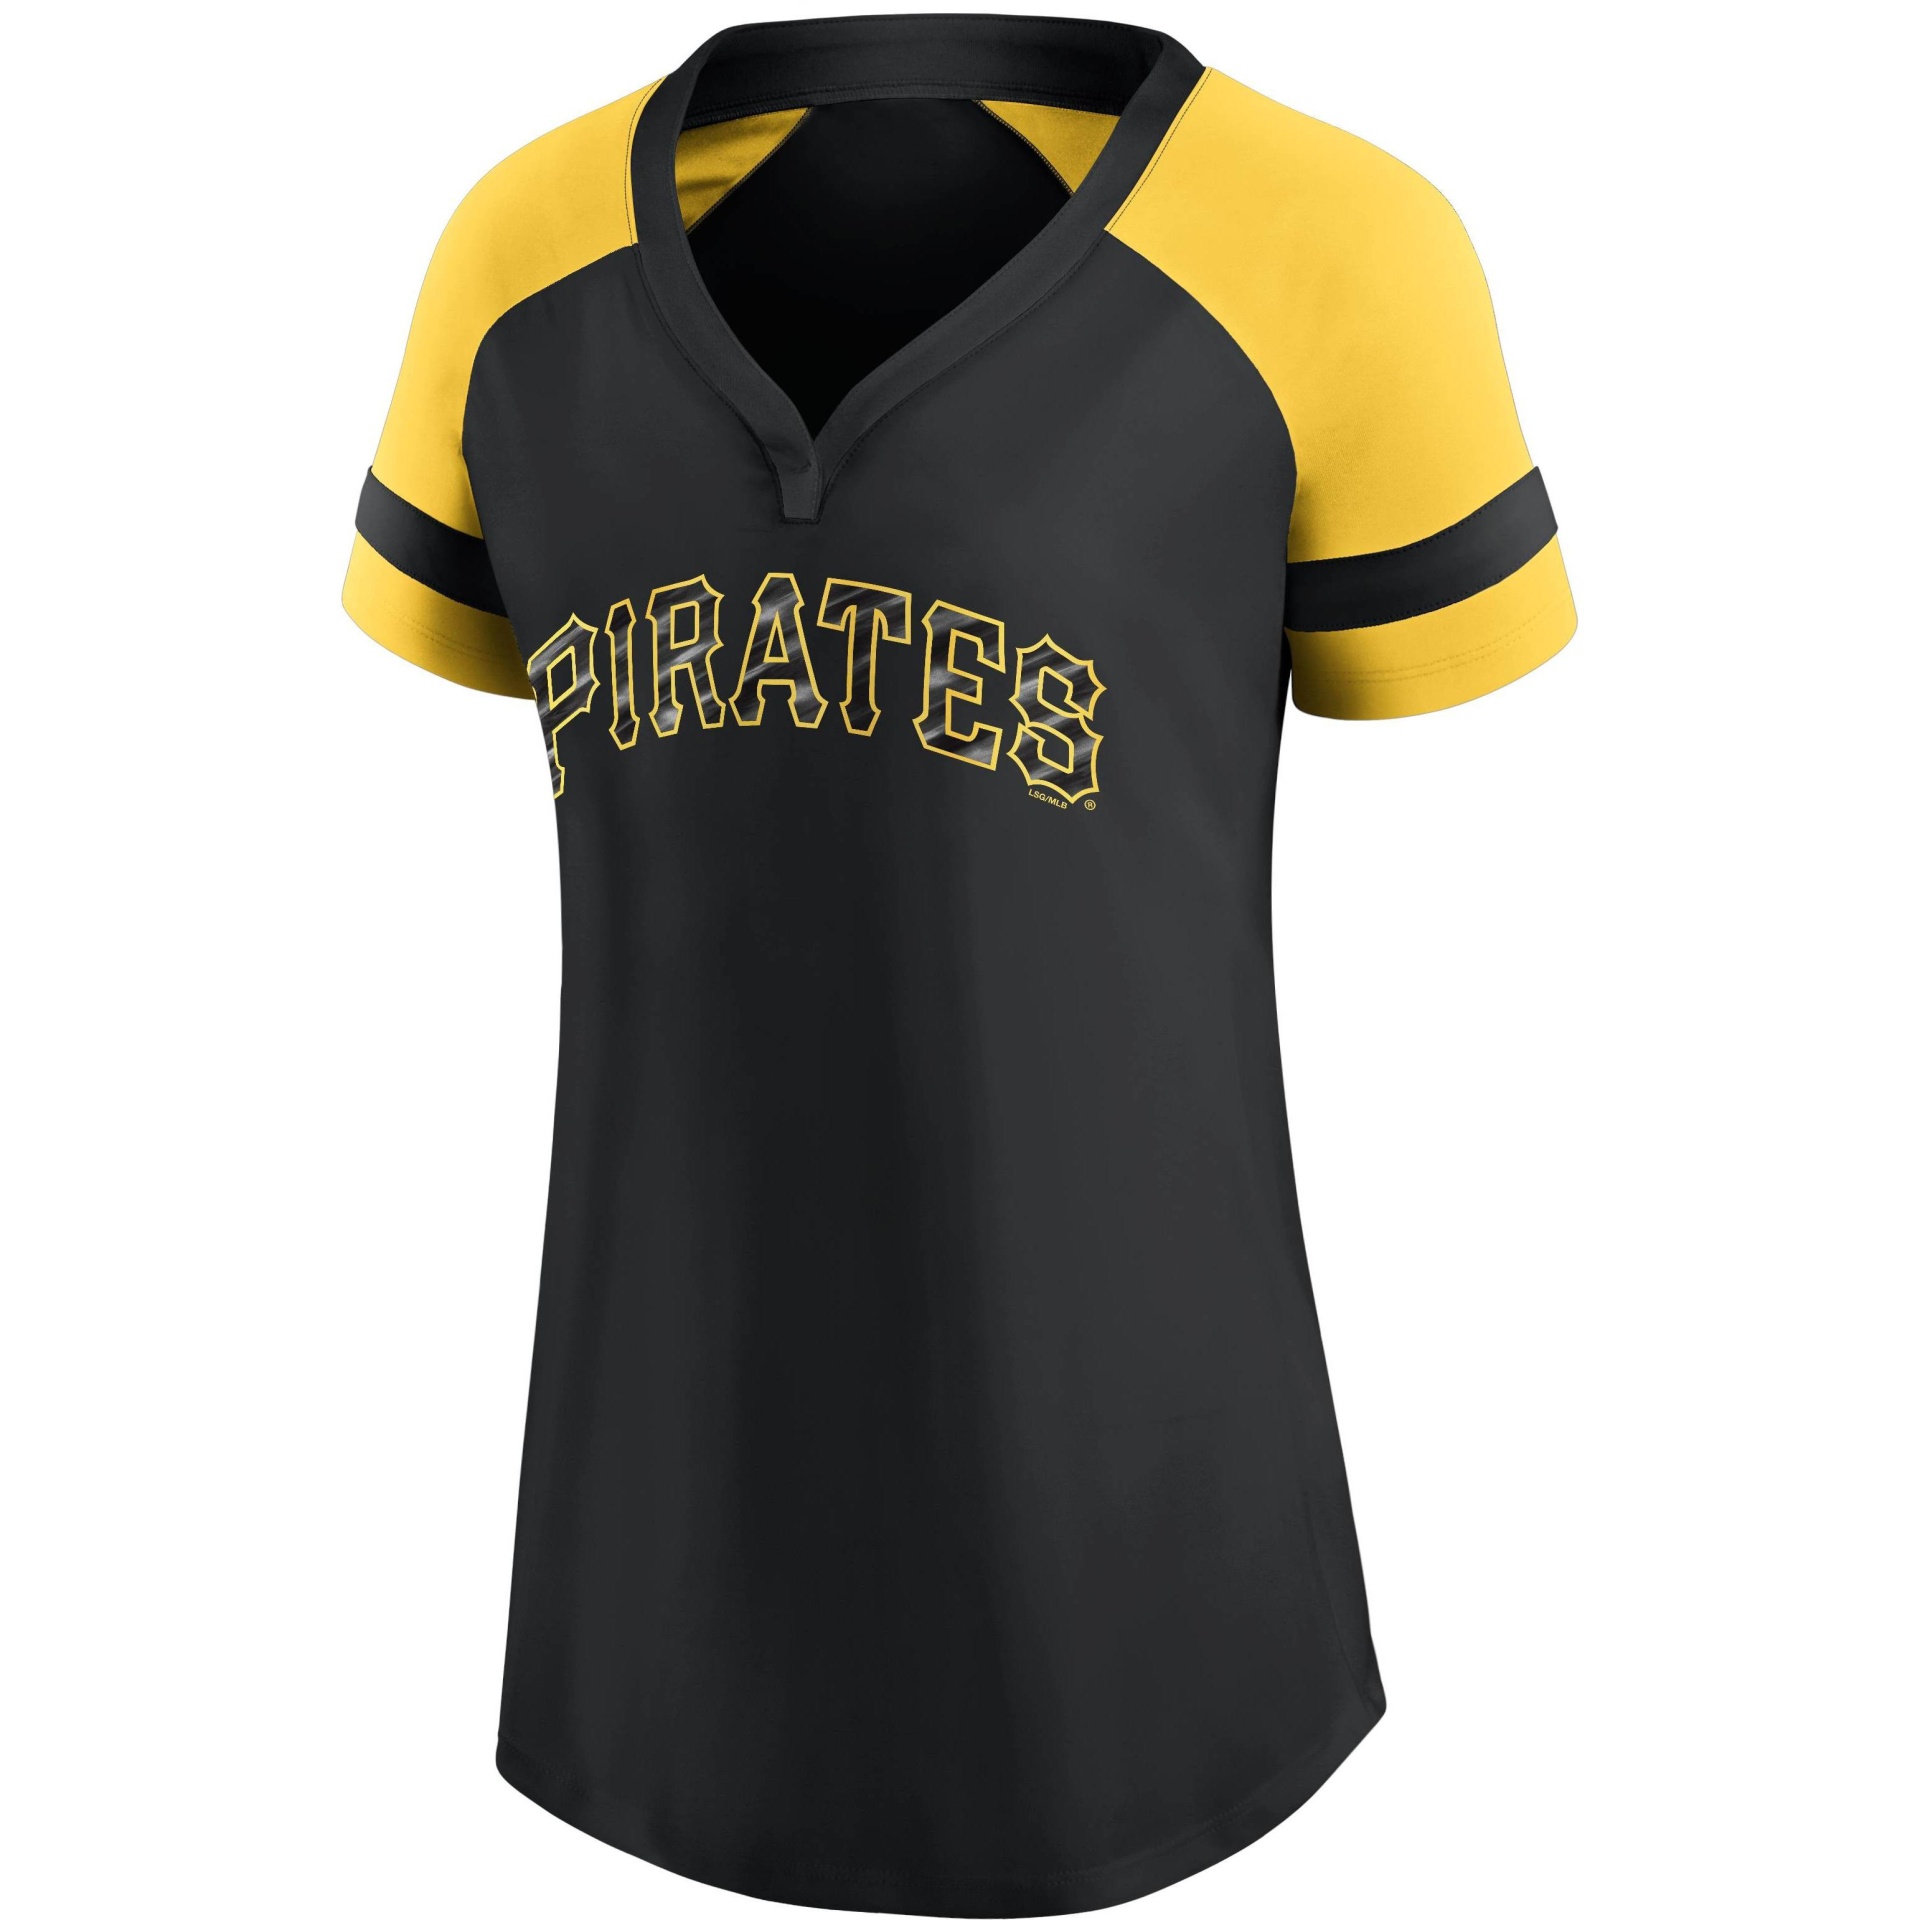 MLB Pittsburgh Pirates Women's One Button Jersey - XL 1 ct